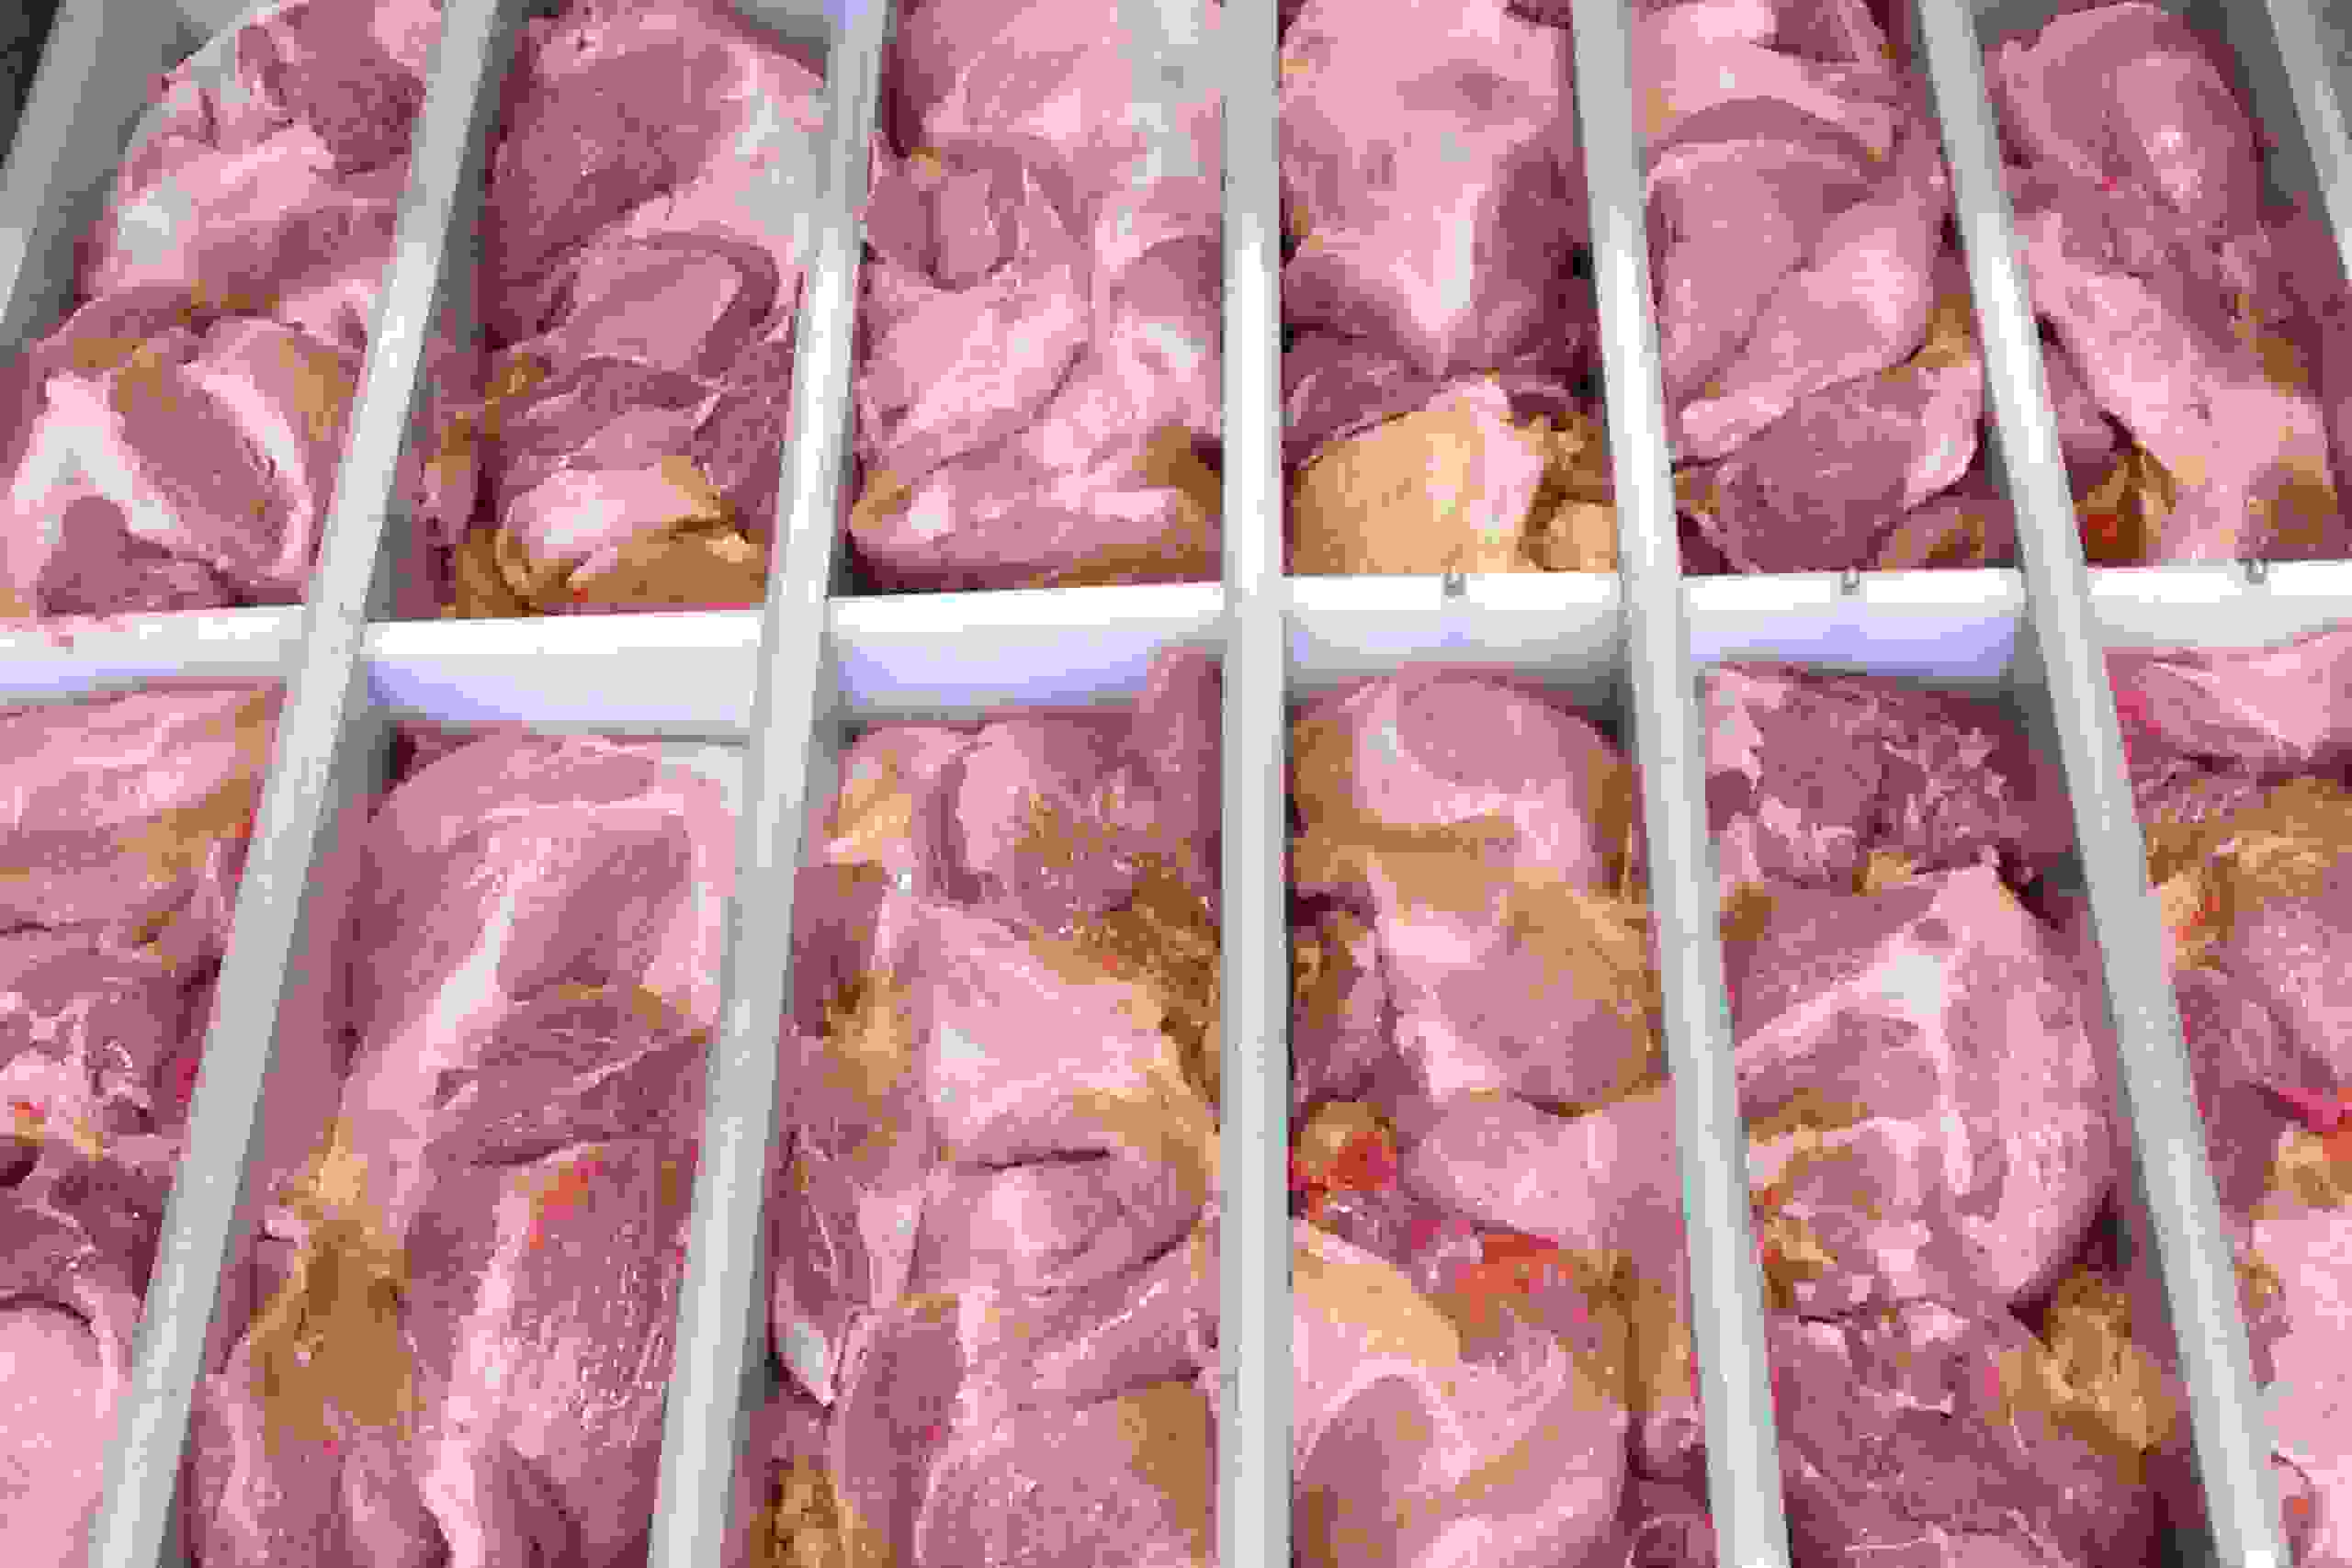 Plate freezing of meat and poultry